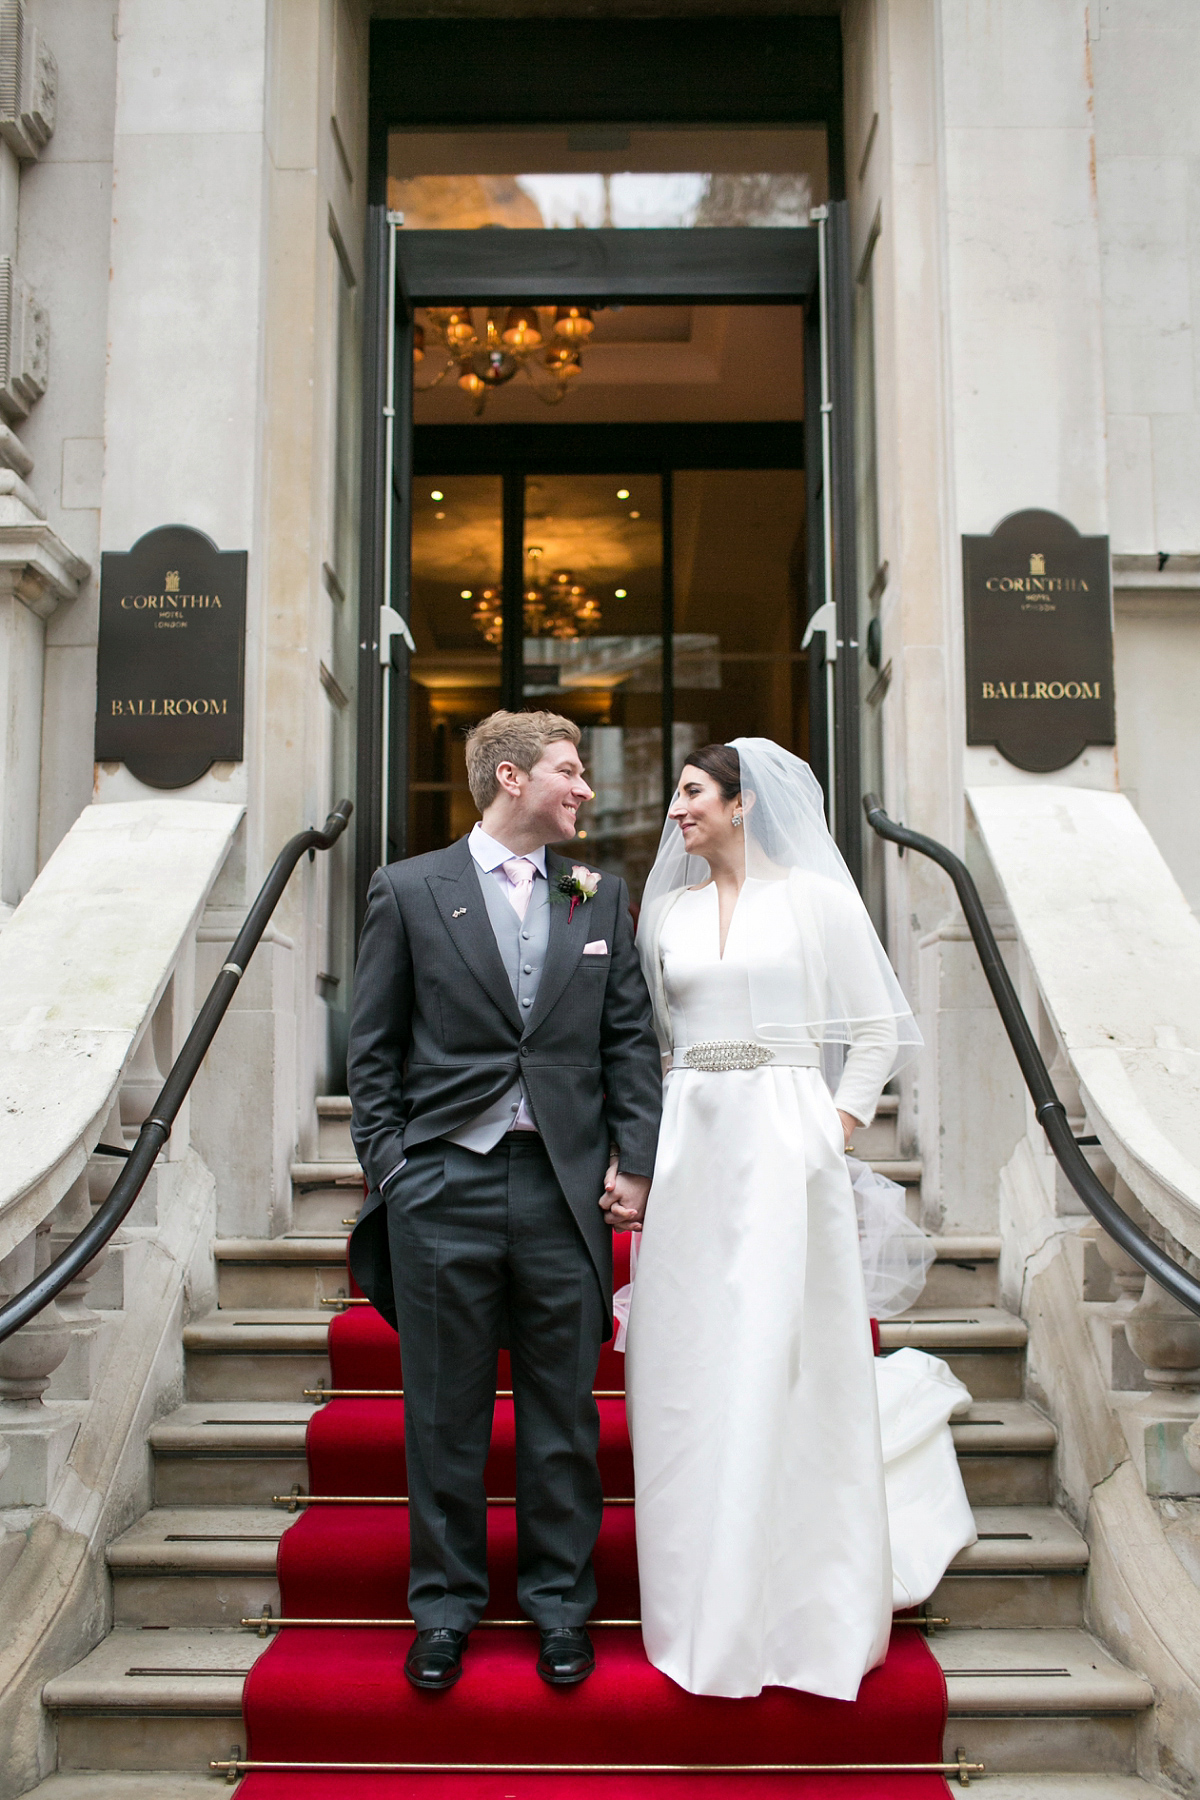 Jane wore a gown by Jesús Peiró for her chic and elegant winter wedding at the Corinthia Hotel in London. Photography by Anneli Marinovich.